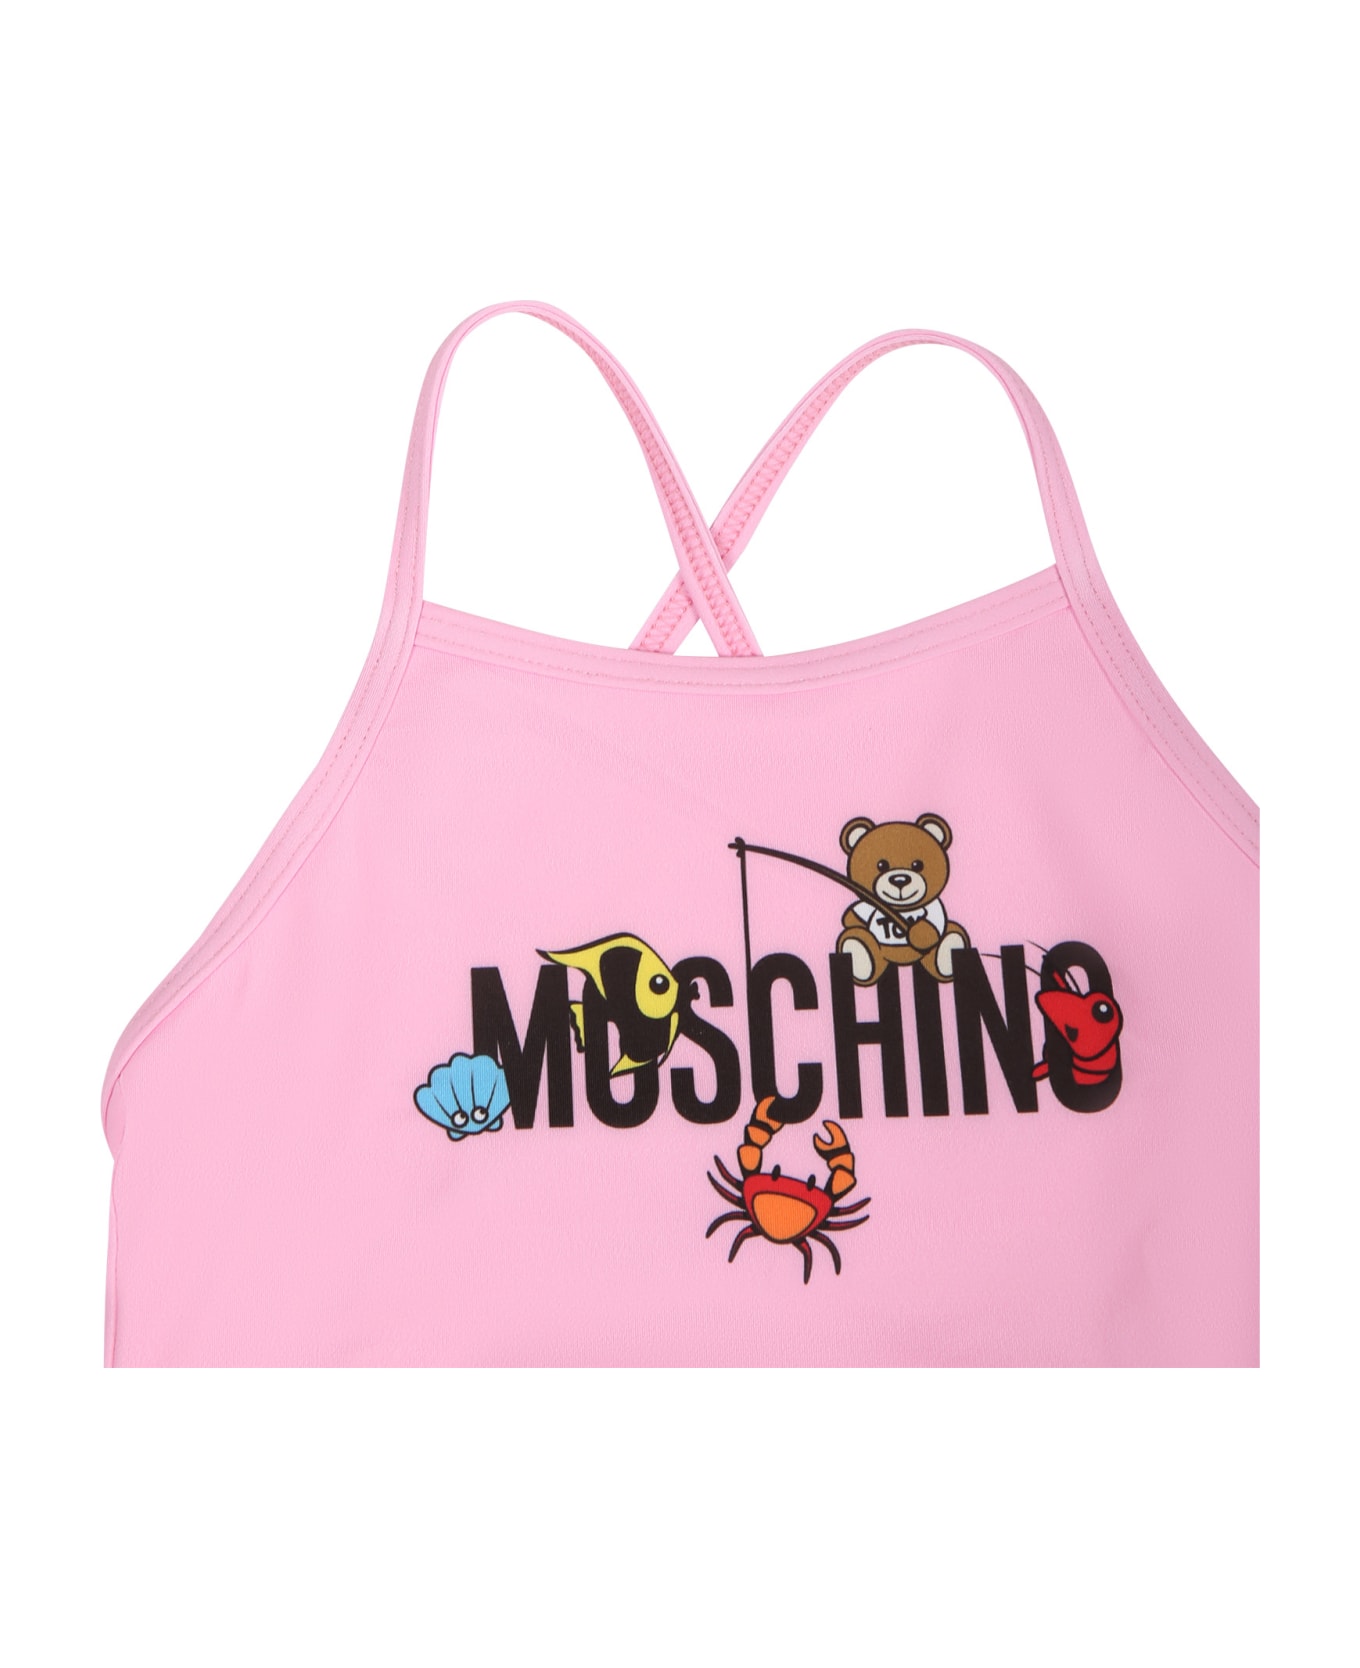 Moschino Pink One Piece Swimsuit For Baby Girl With Logo - Pink 水着